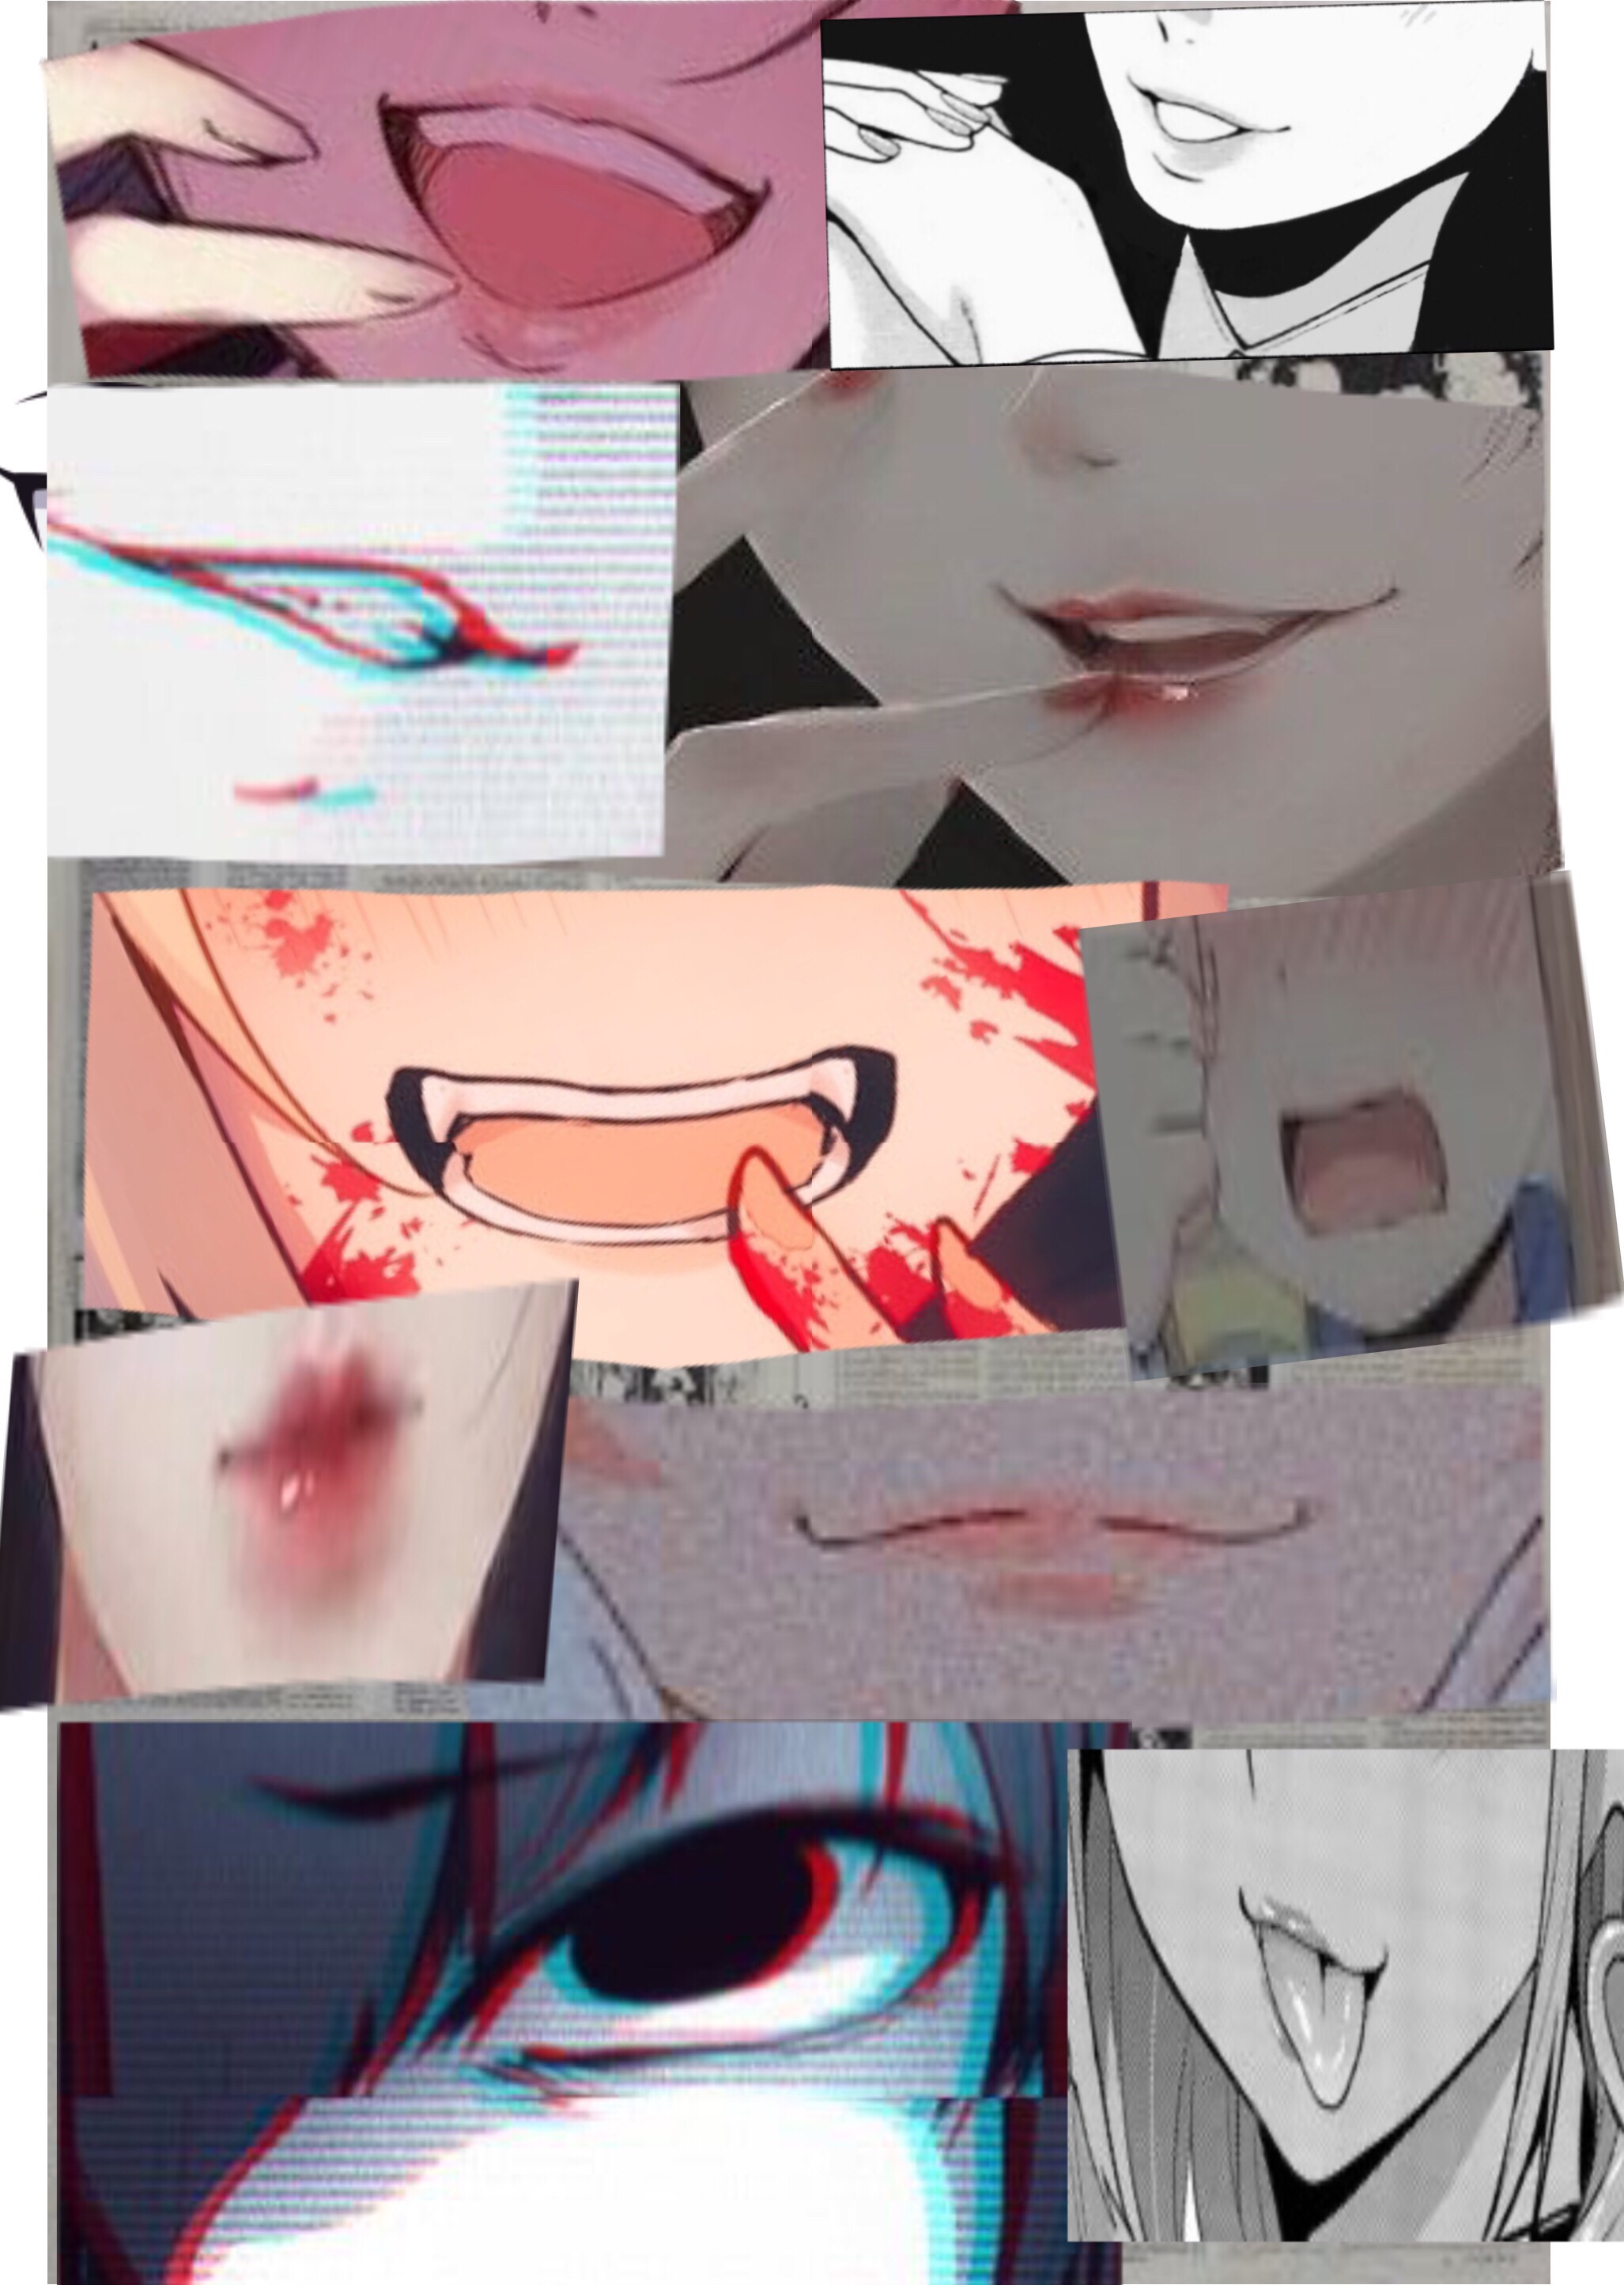 Anime mouth aesthetic